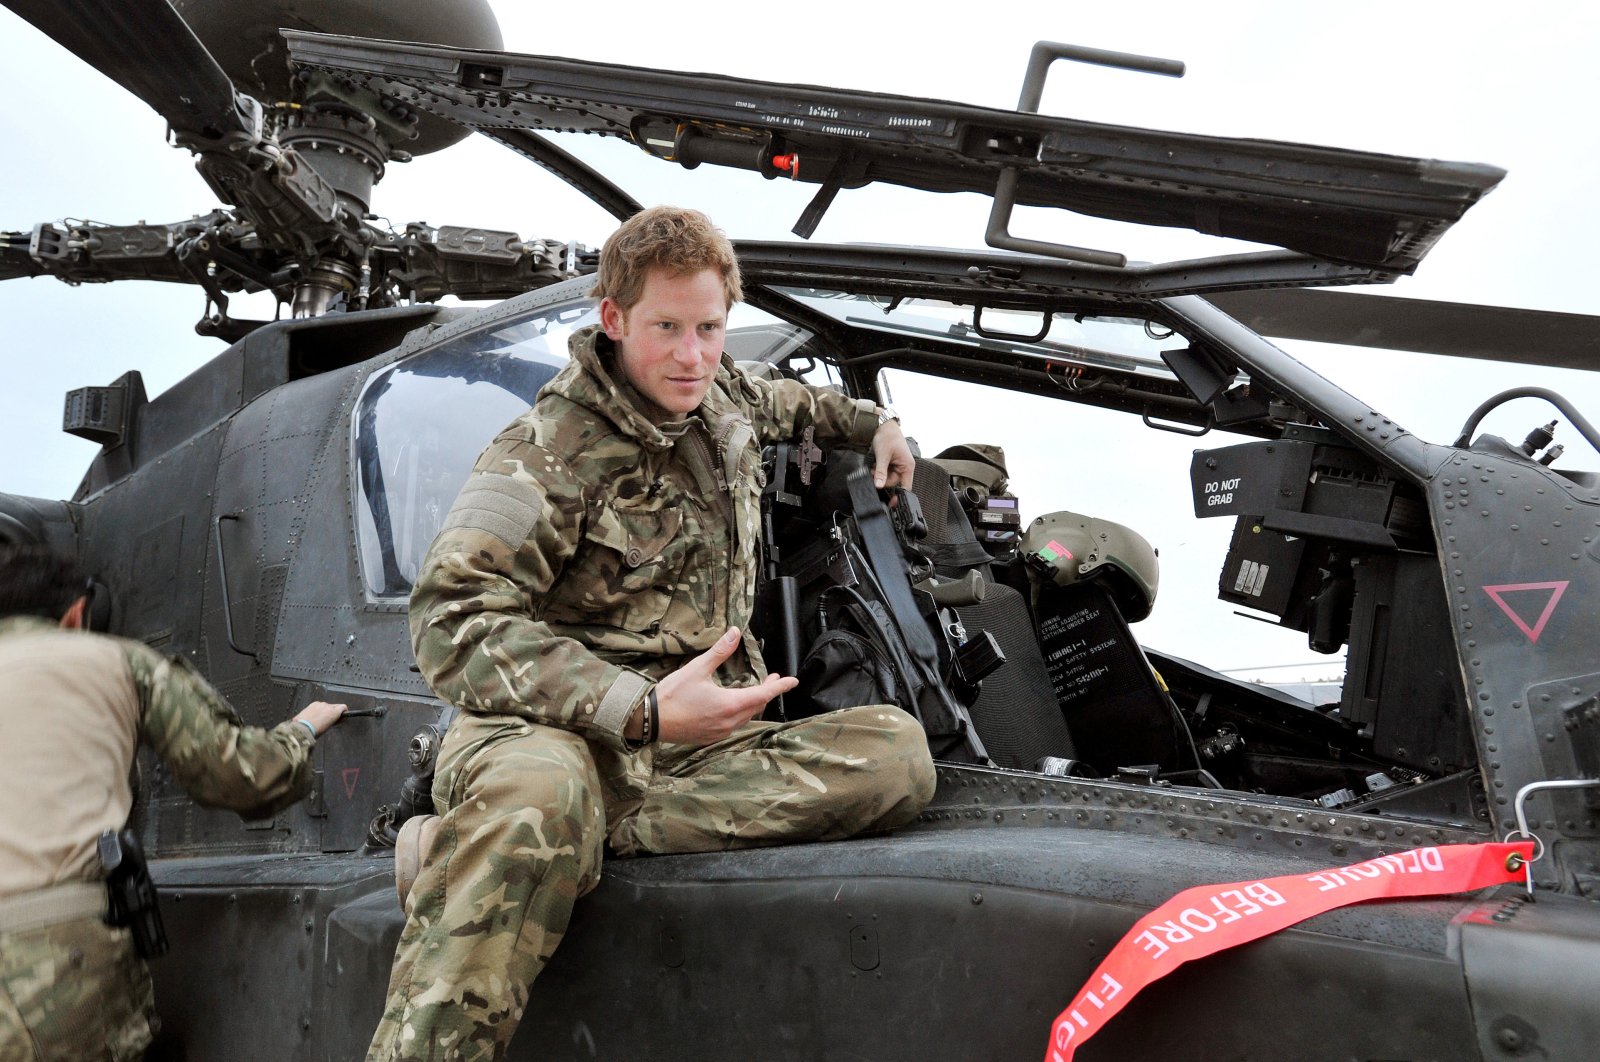 In this file photo dated Dec. 12, 2012, made public on Jan. 21, 2013, Britain&#039;s Prince Harry talks to a TV crew after an early morning pre-flight checks on the flight-line, from Camp Bastion, southern Afghanistan. (AP Photo)